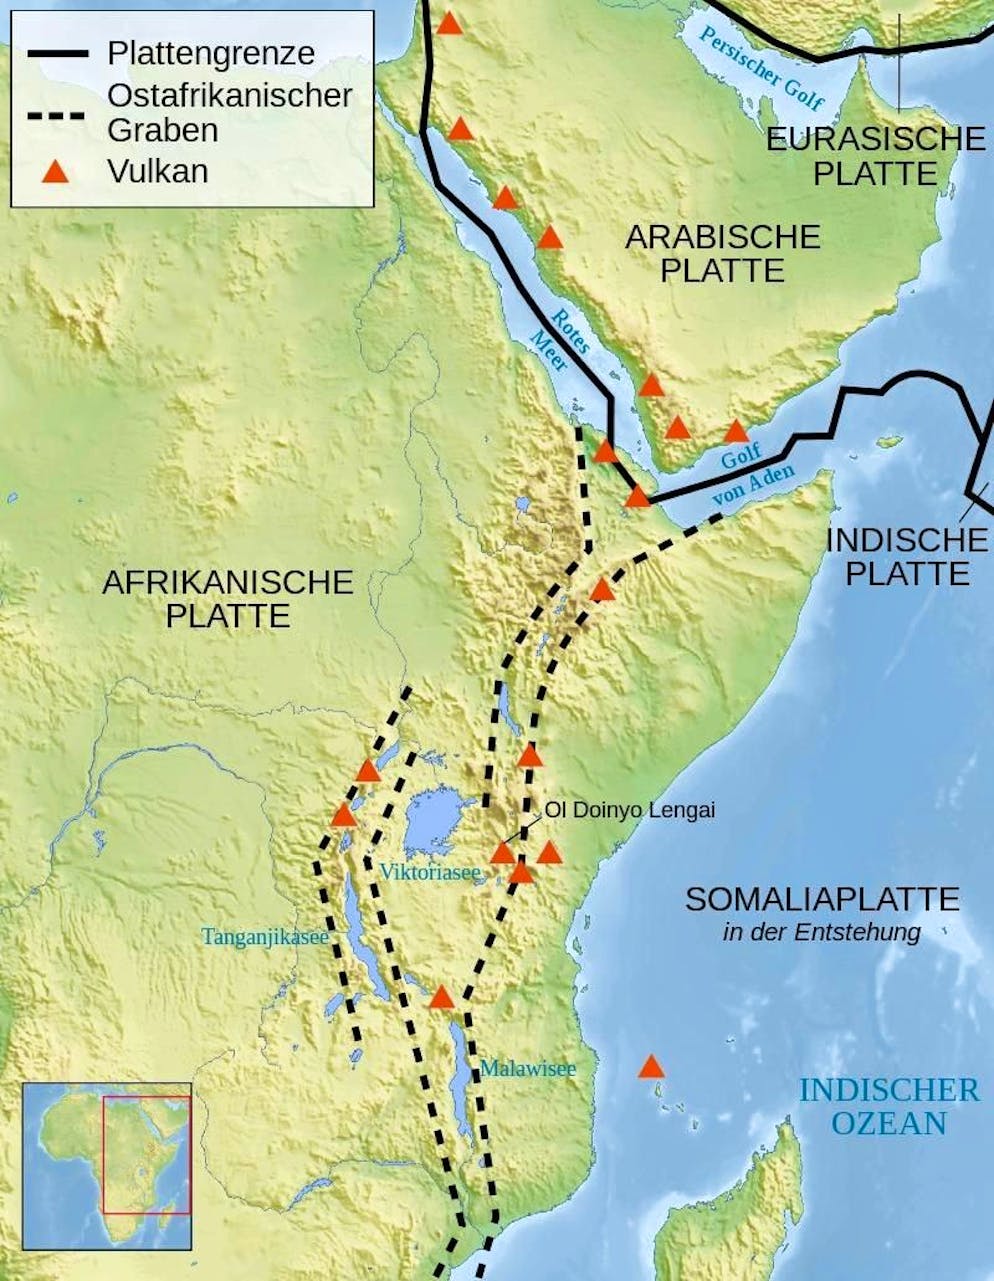 The route of the Great African Rift Valley.